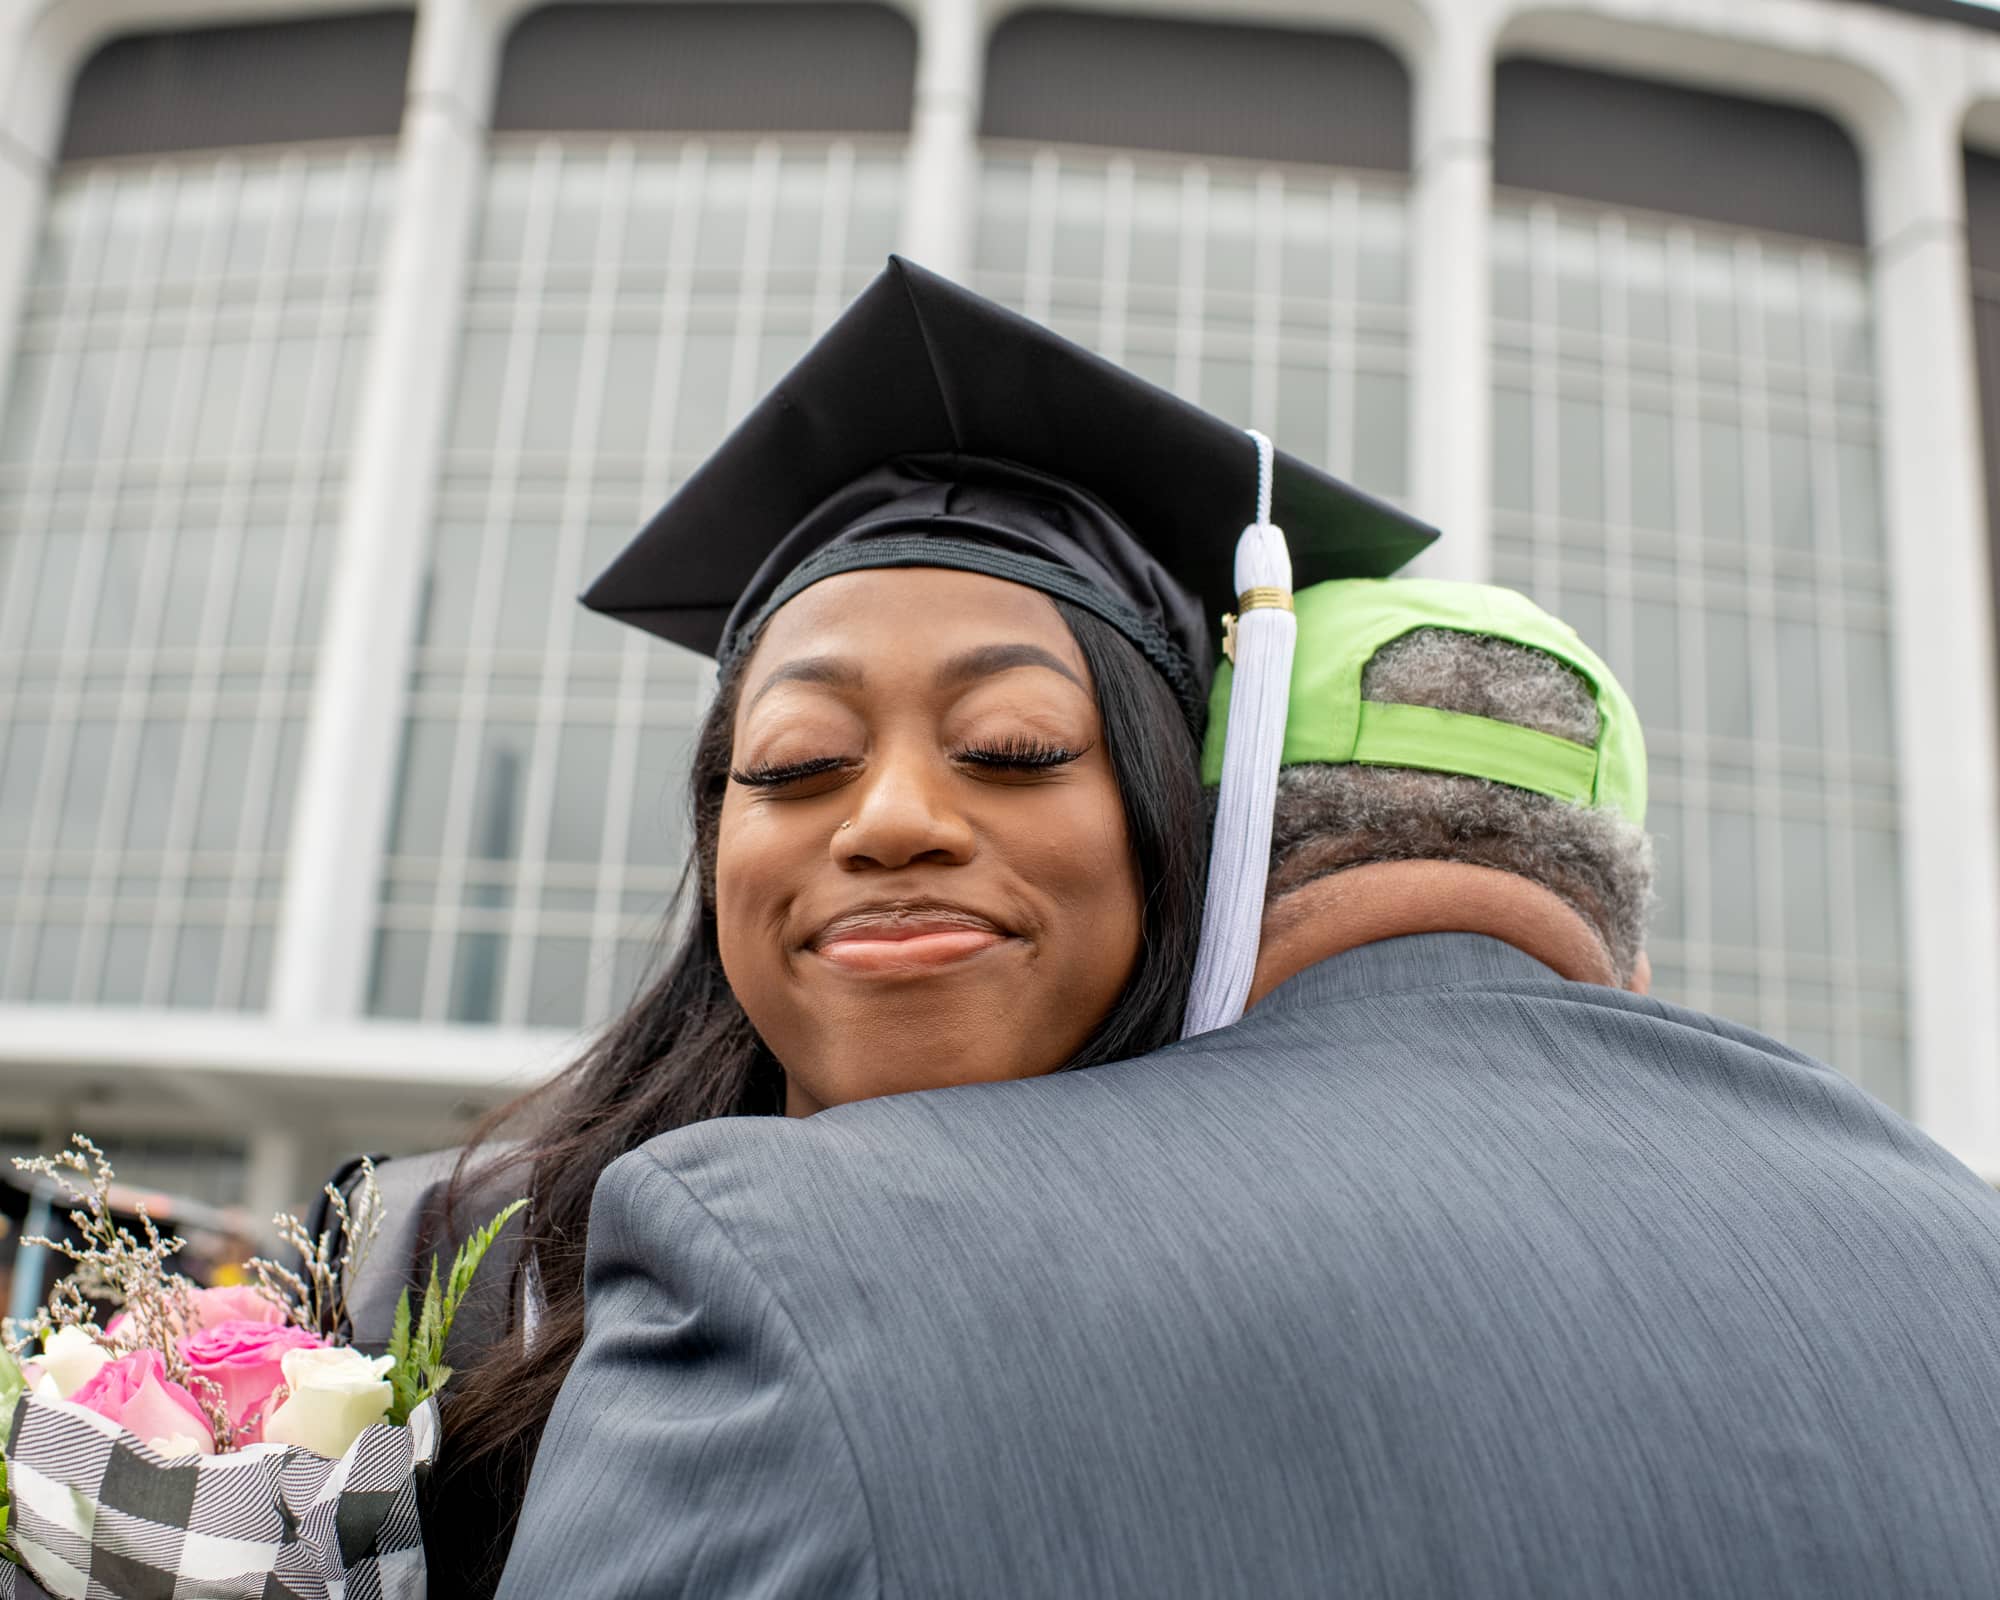 A student receives flowers and a hug following undergraduate commencement.